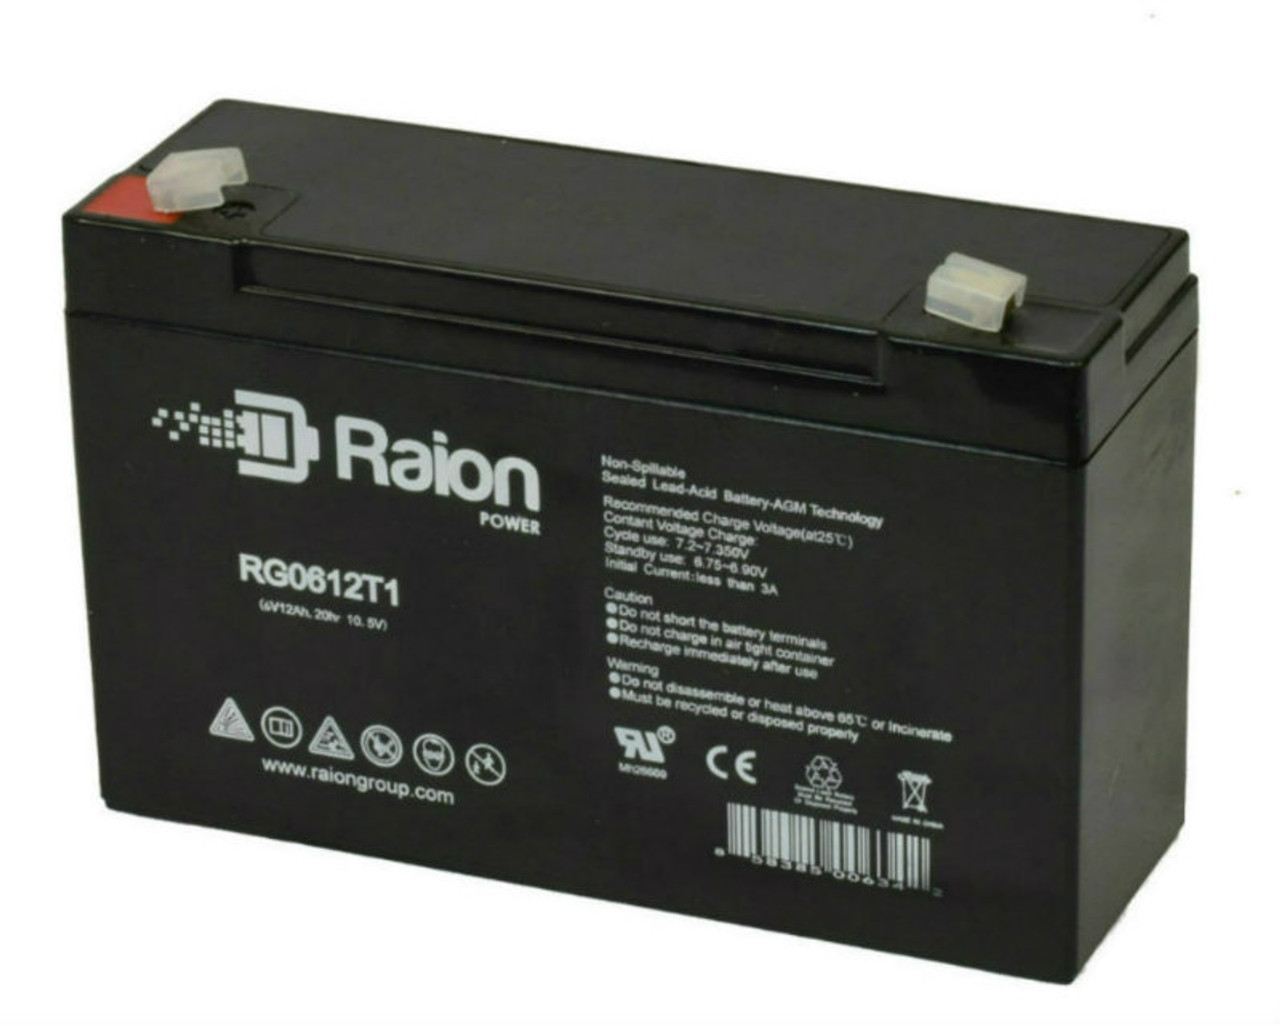 Raion Power RG06120T1 Replacement Battery for GFX NP12-6